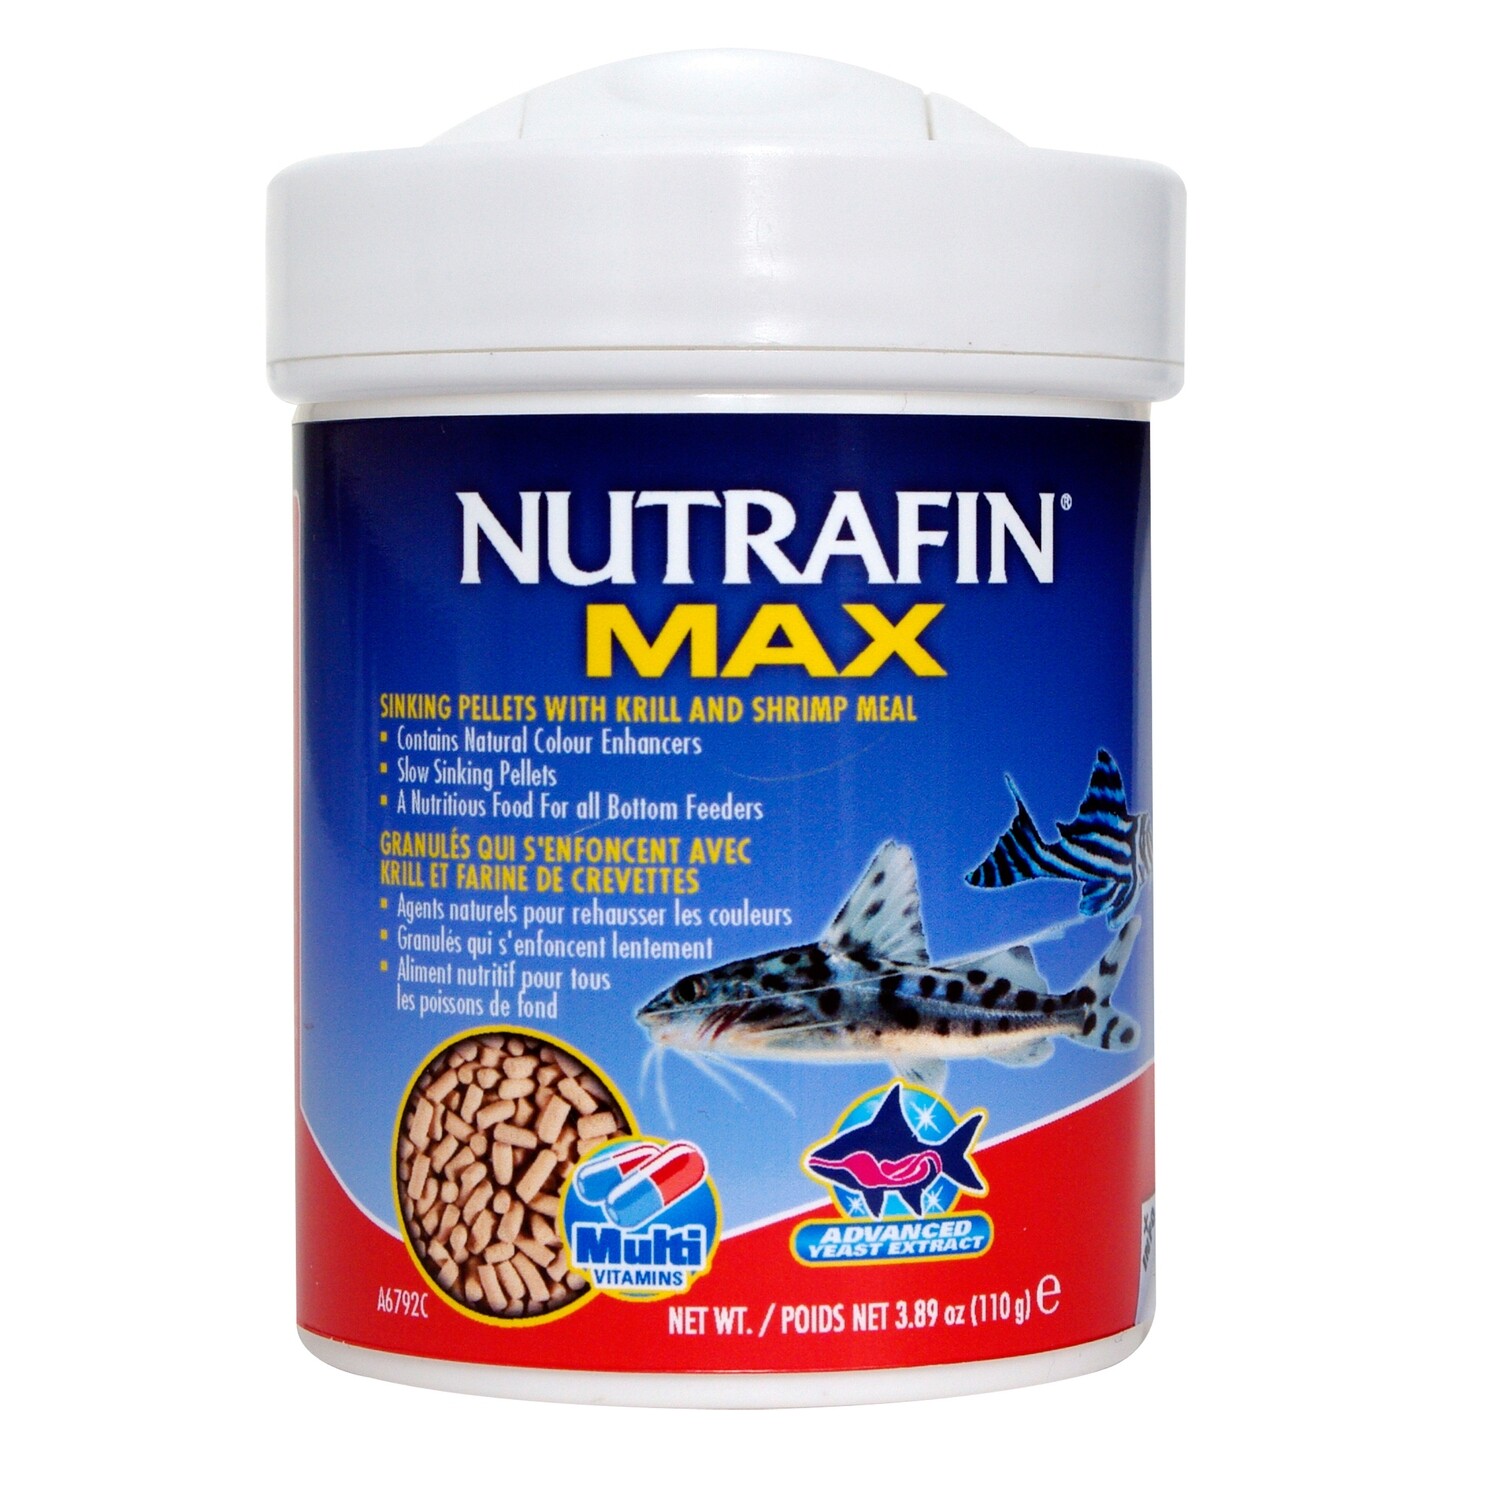 Nutrafin Max Sinking Pellets with Krill and Shrimp Meal, 110 g (3.89 oz)